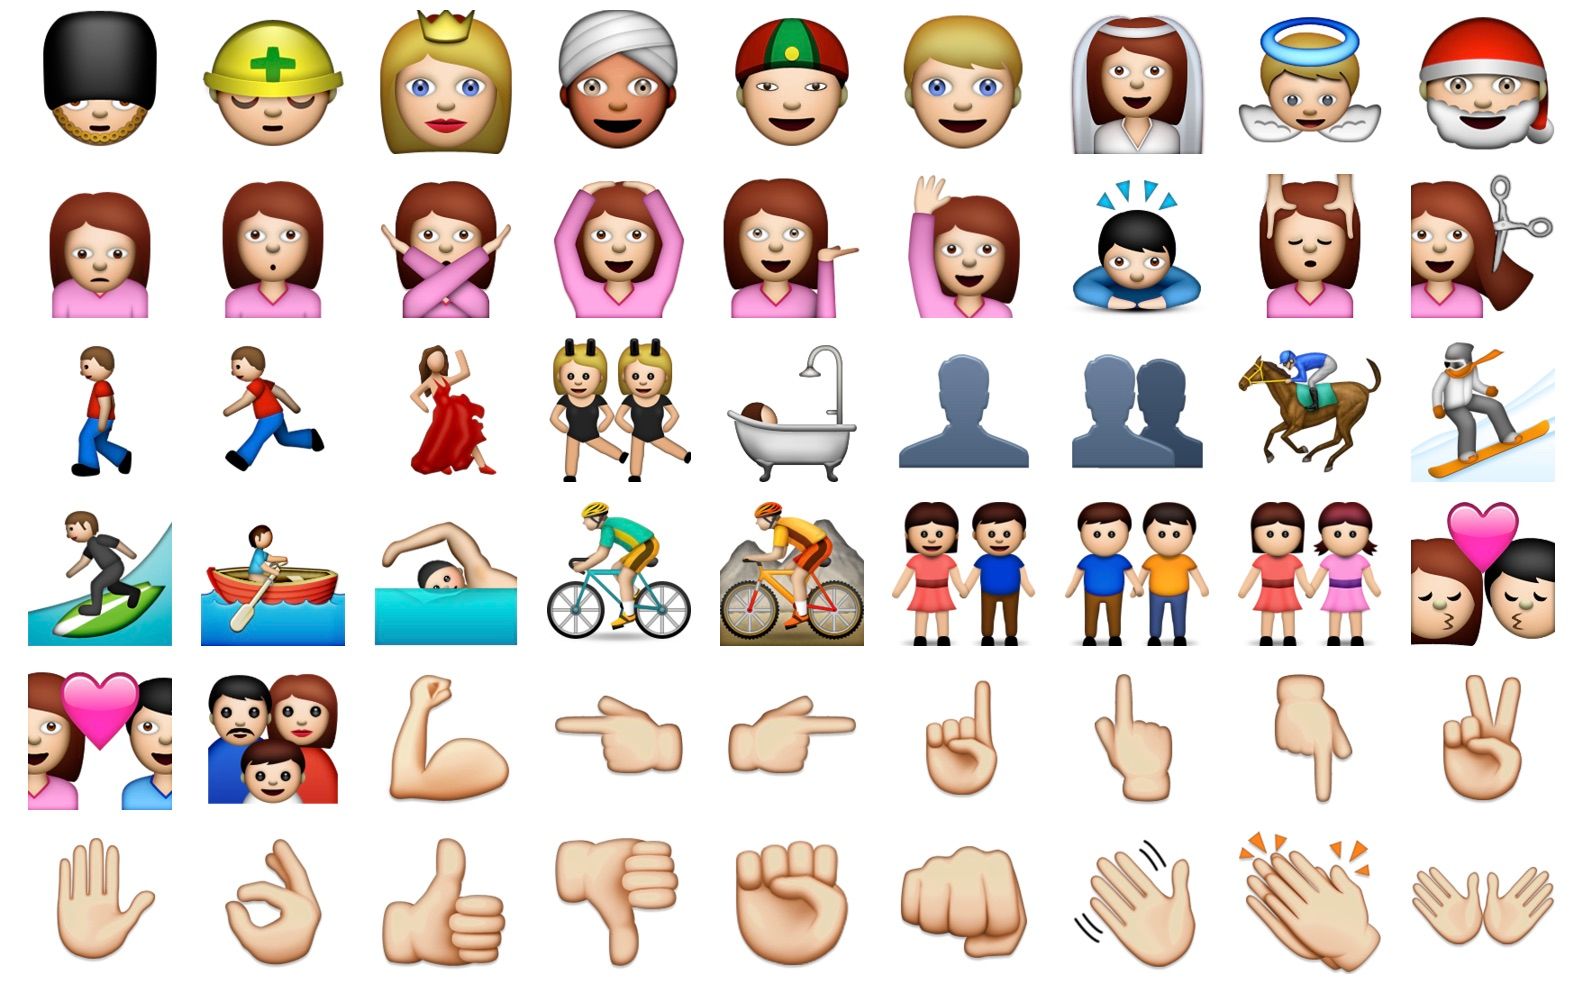 Browse the Emoji Archives